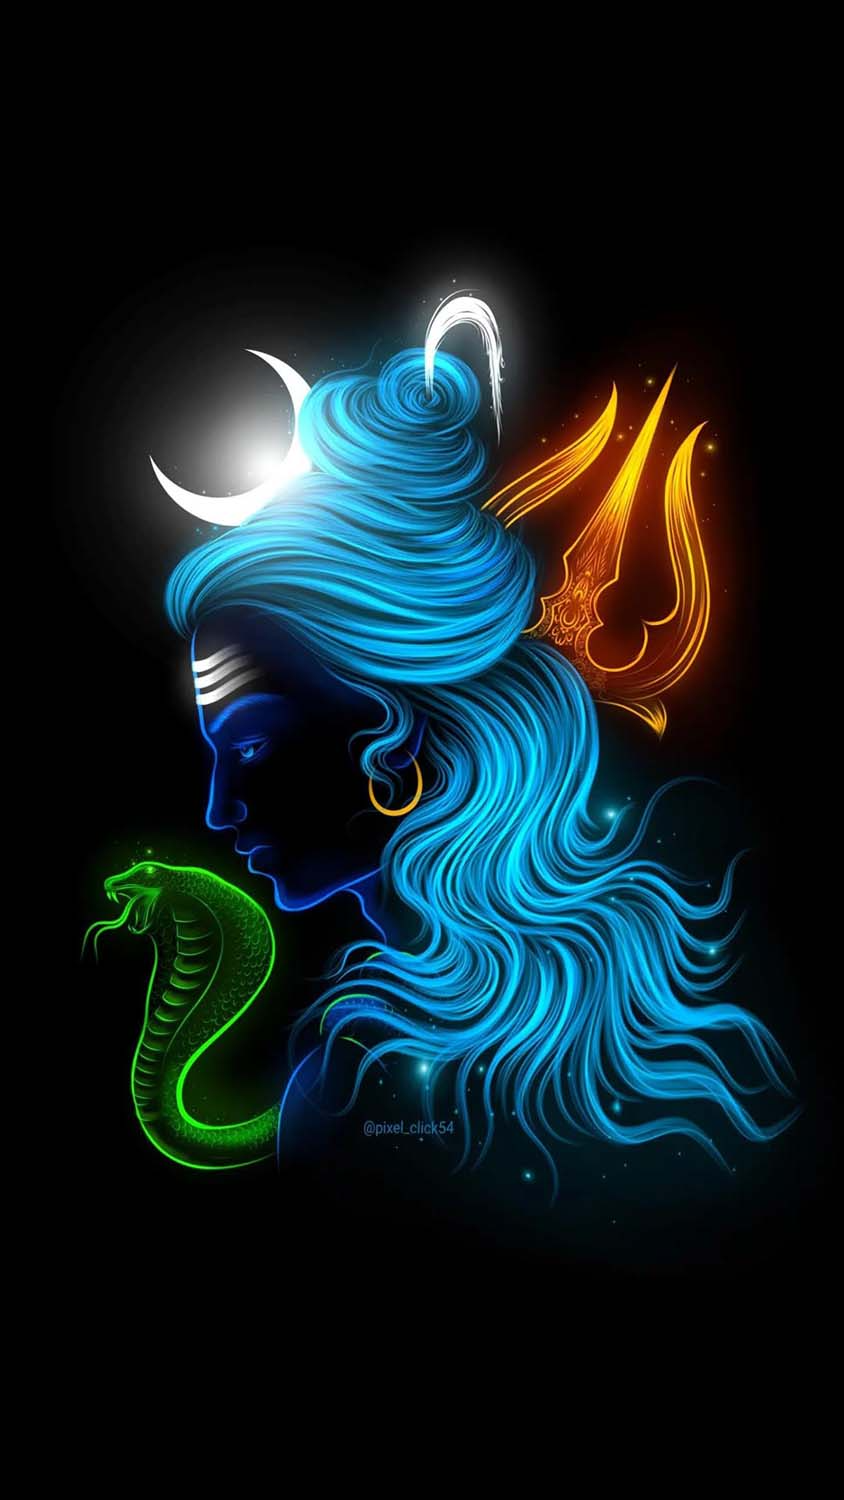 GODS LORD SHIVA ON FINE ART PAPER HD QUALITY WALLPAPER POSTER Fine Art  Print 19 inch X 13 inch Rolled Paper Print  Religious posters in India   Buy art film design